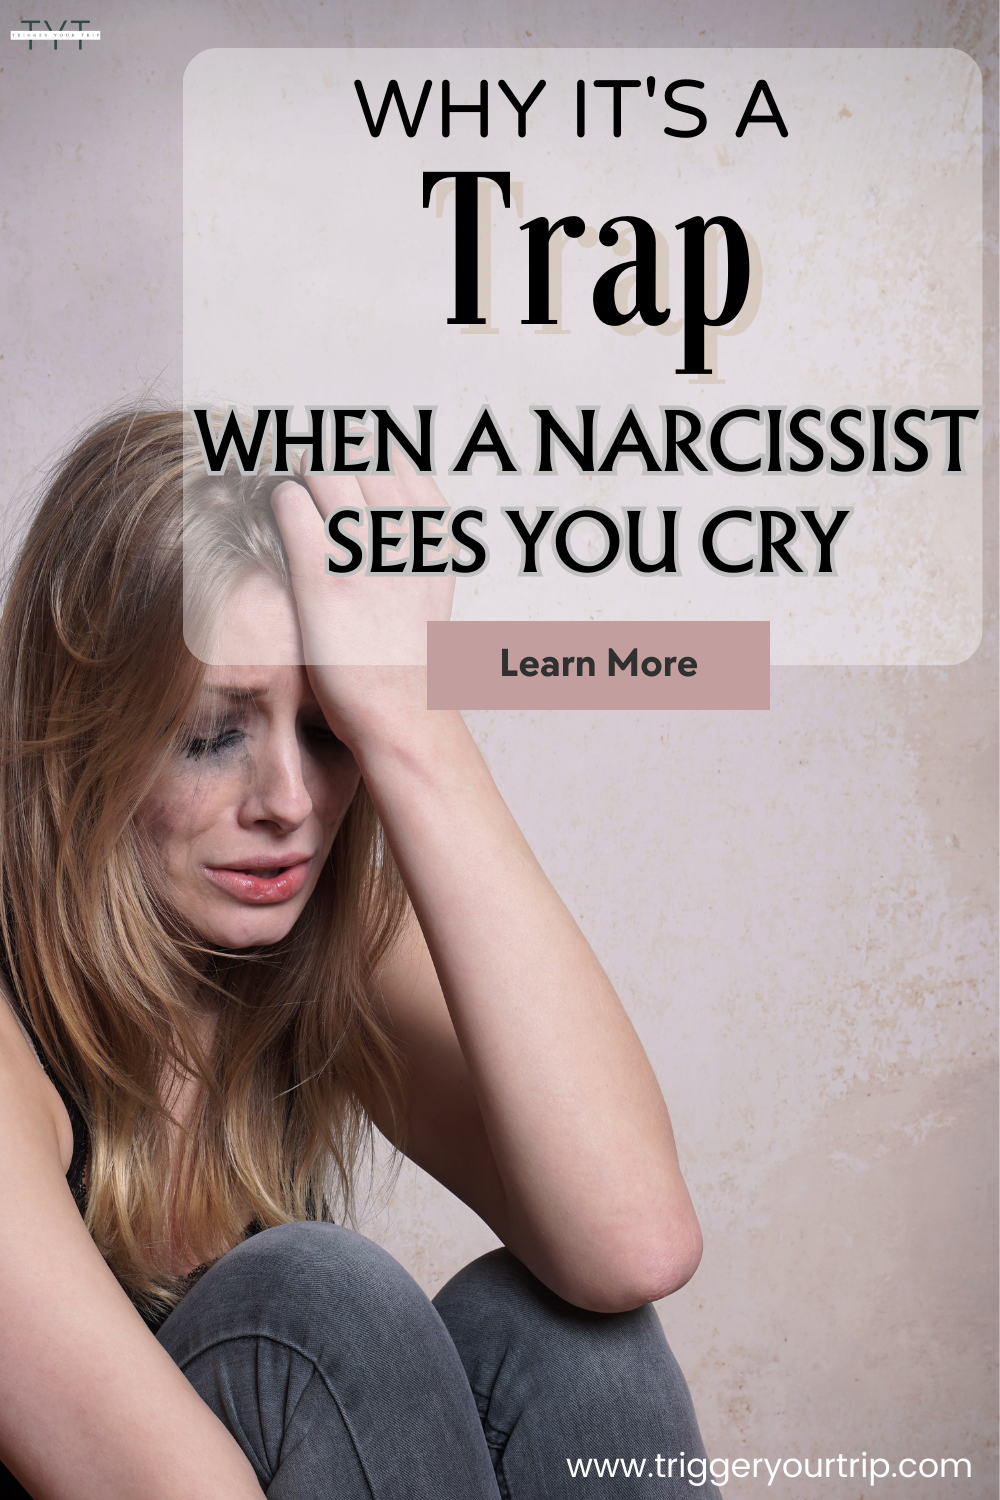 narcissists understand emotions though they don't have empathy, but do narcissists love? 